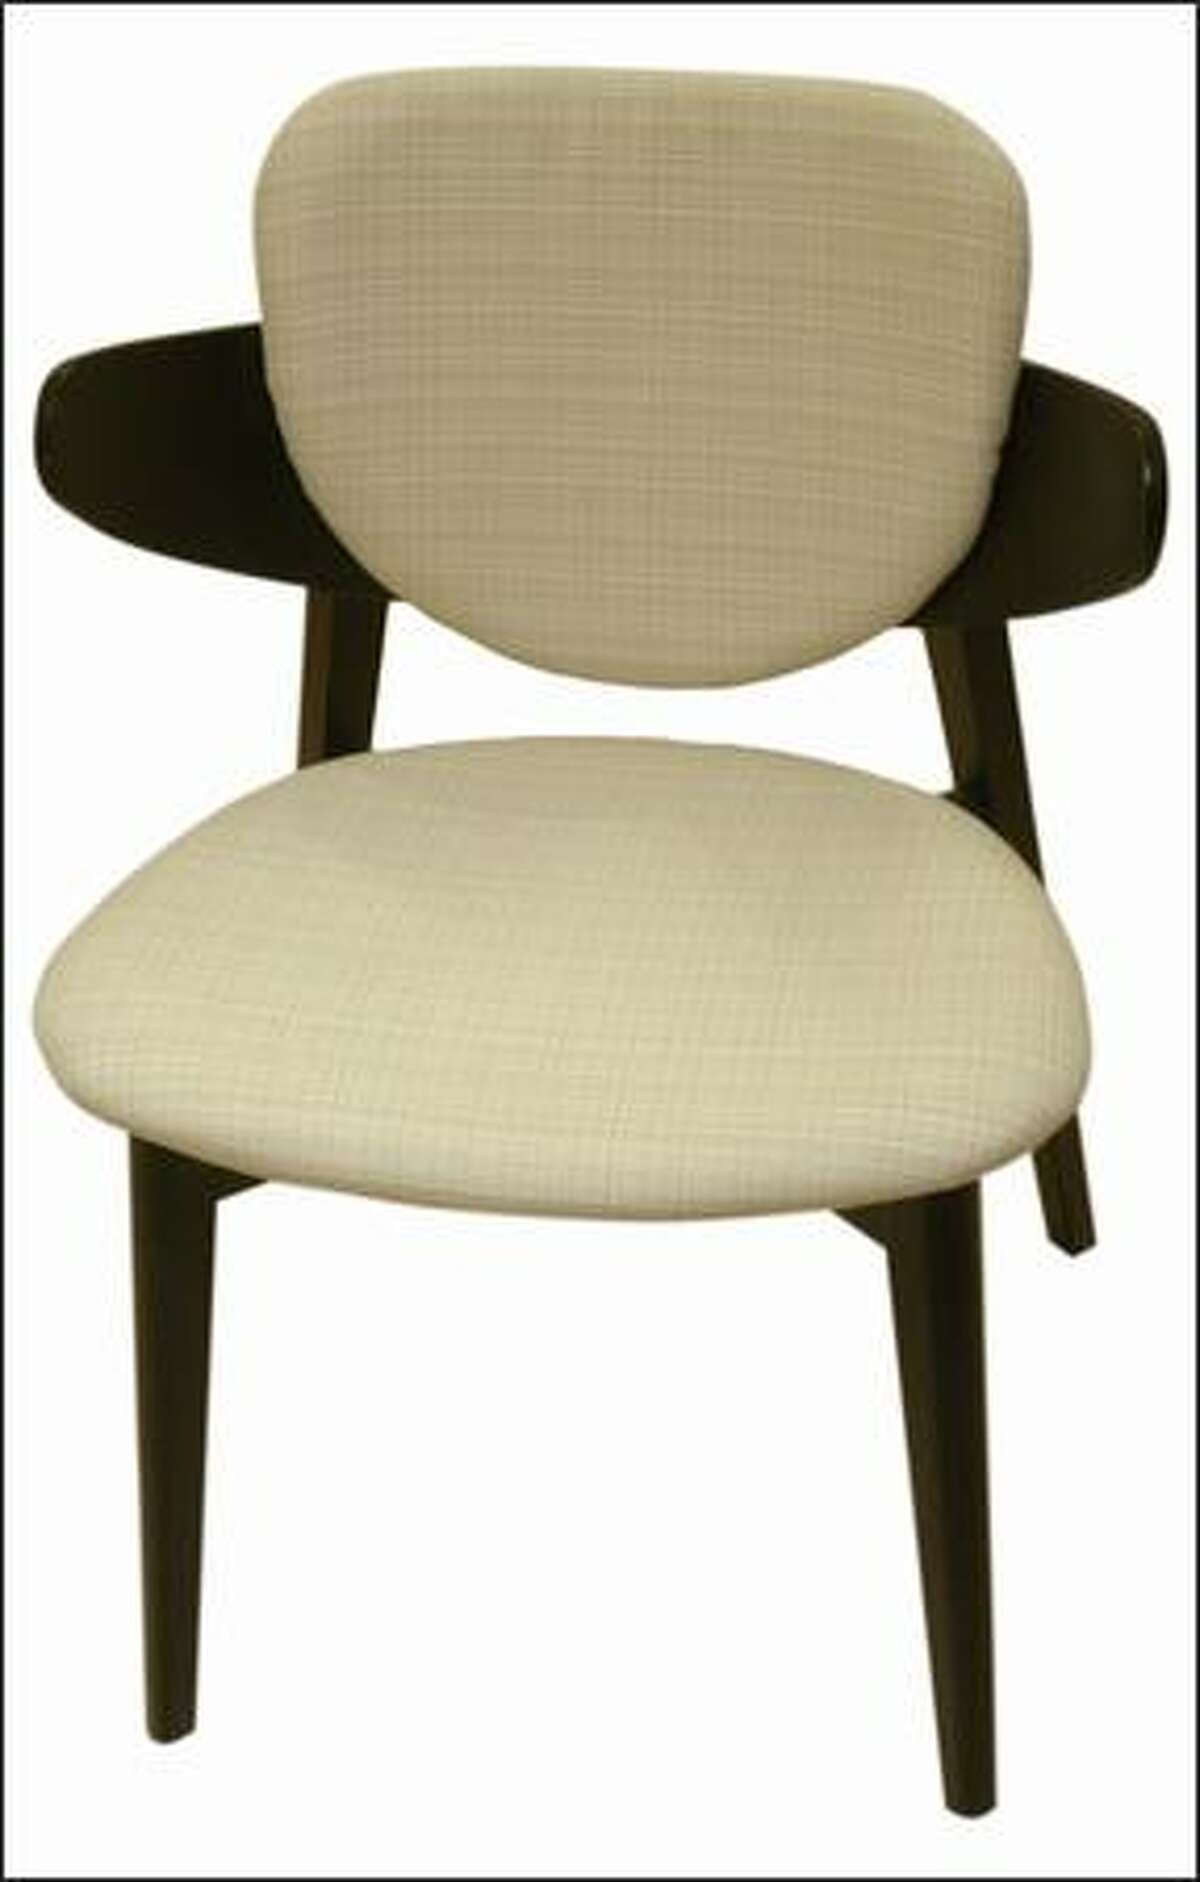 One chair that met our comfort, quality and aesthetic requirements was the Gottfrid dining chair. At $79.99, it would work great in the dining room or as extra seating in a living room.